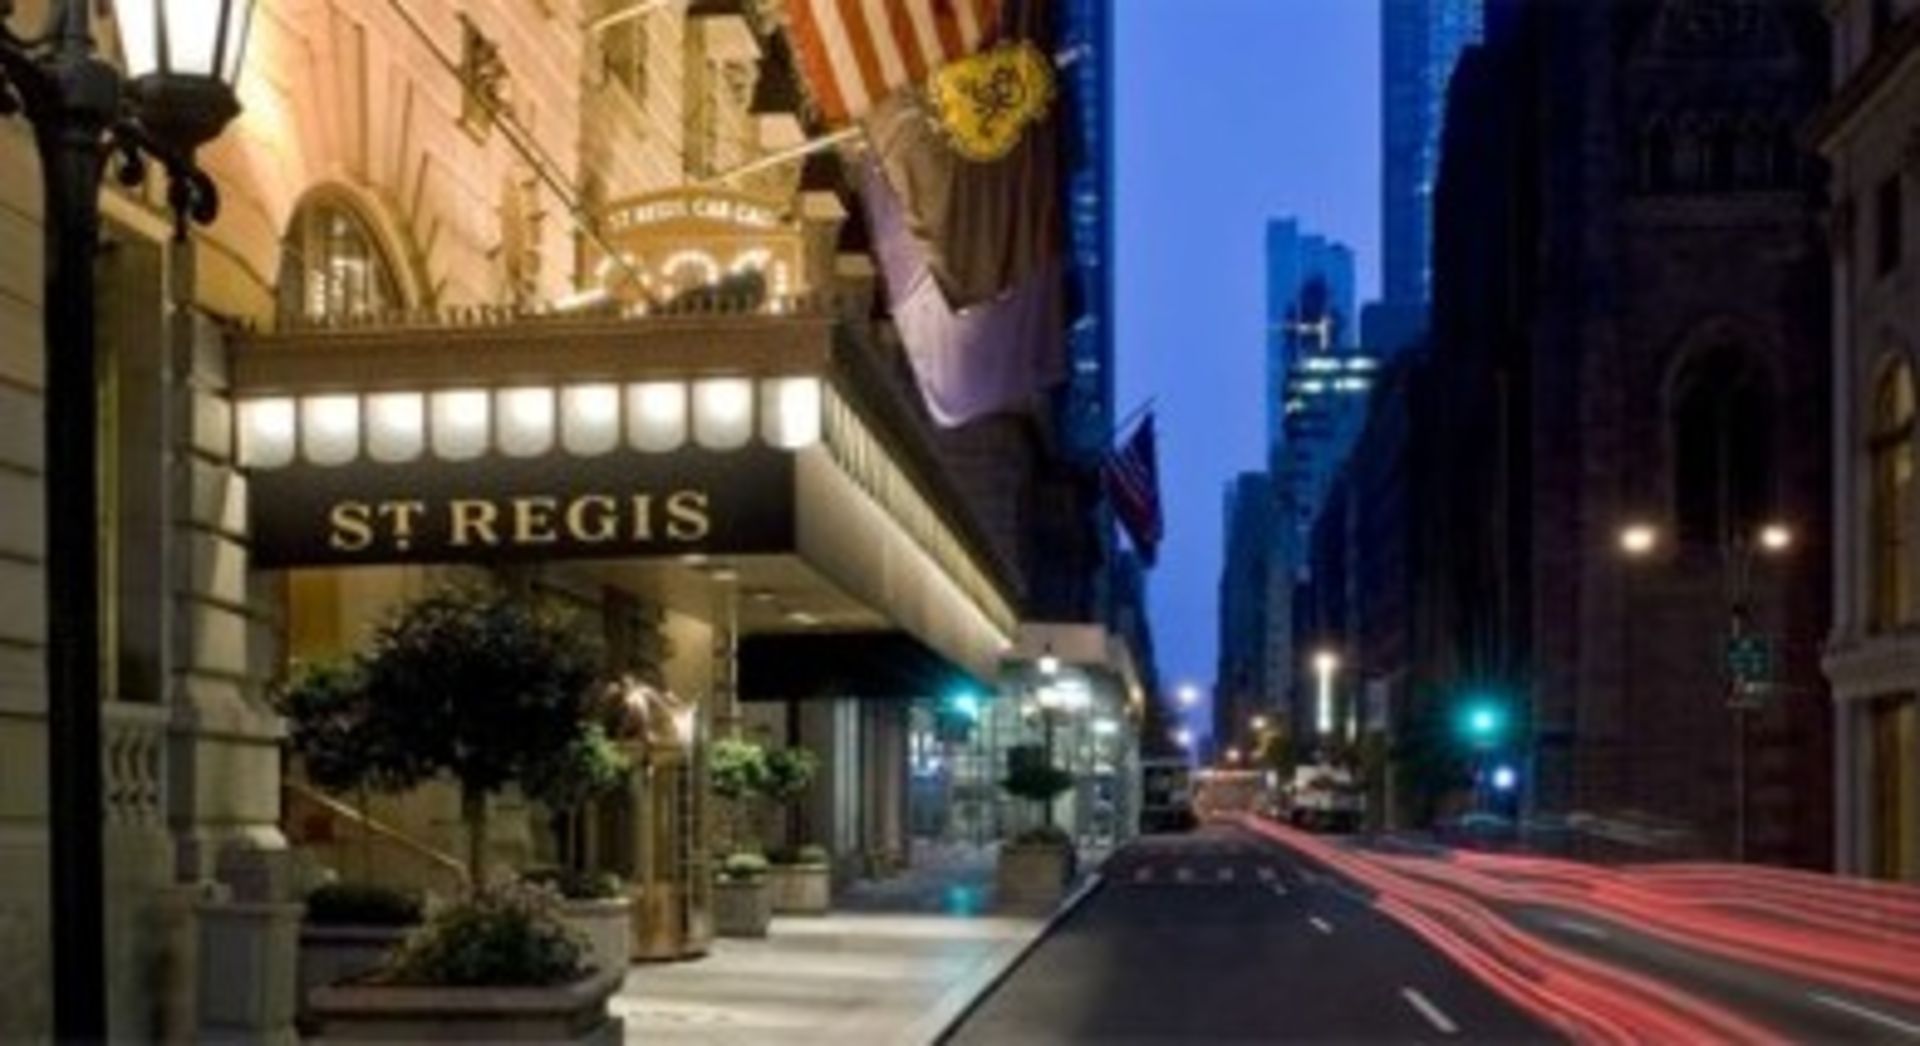 VACATION EXPERIENCE: St Regis, NYC